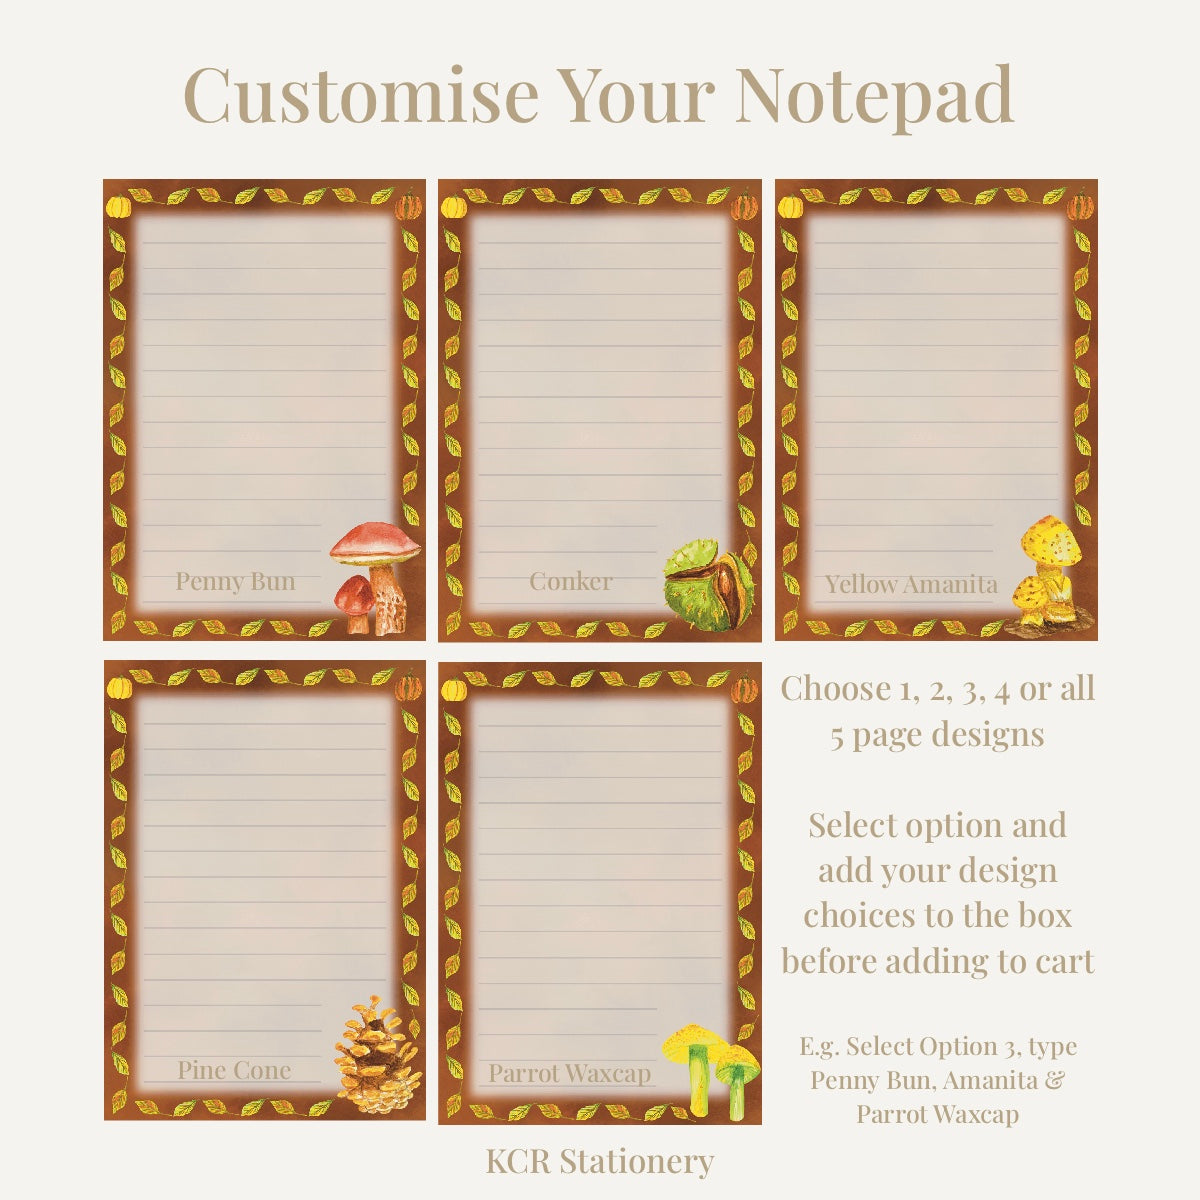 Fall forage notepad custom guide showing how to build your notepad choosing 1,2,3,4 or 5 designs across 50 pages